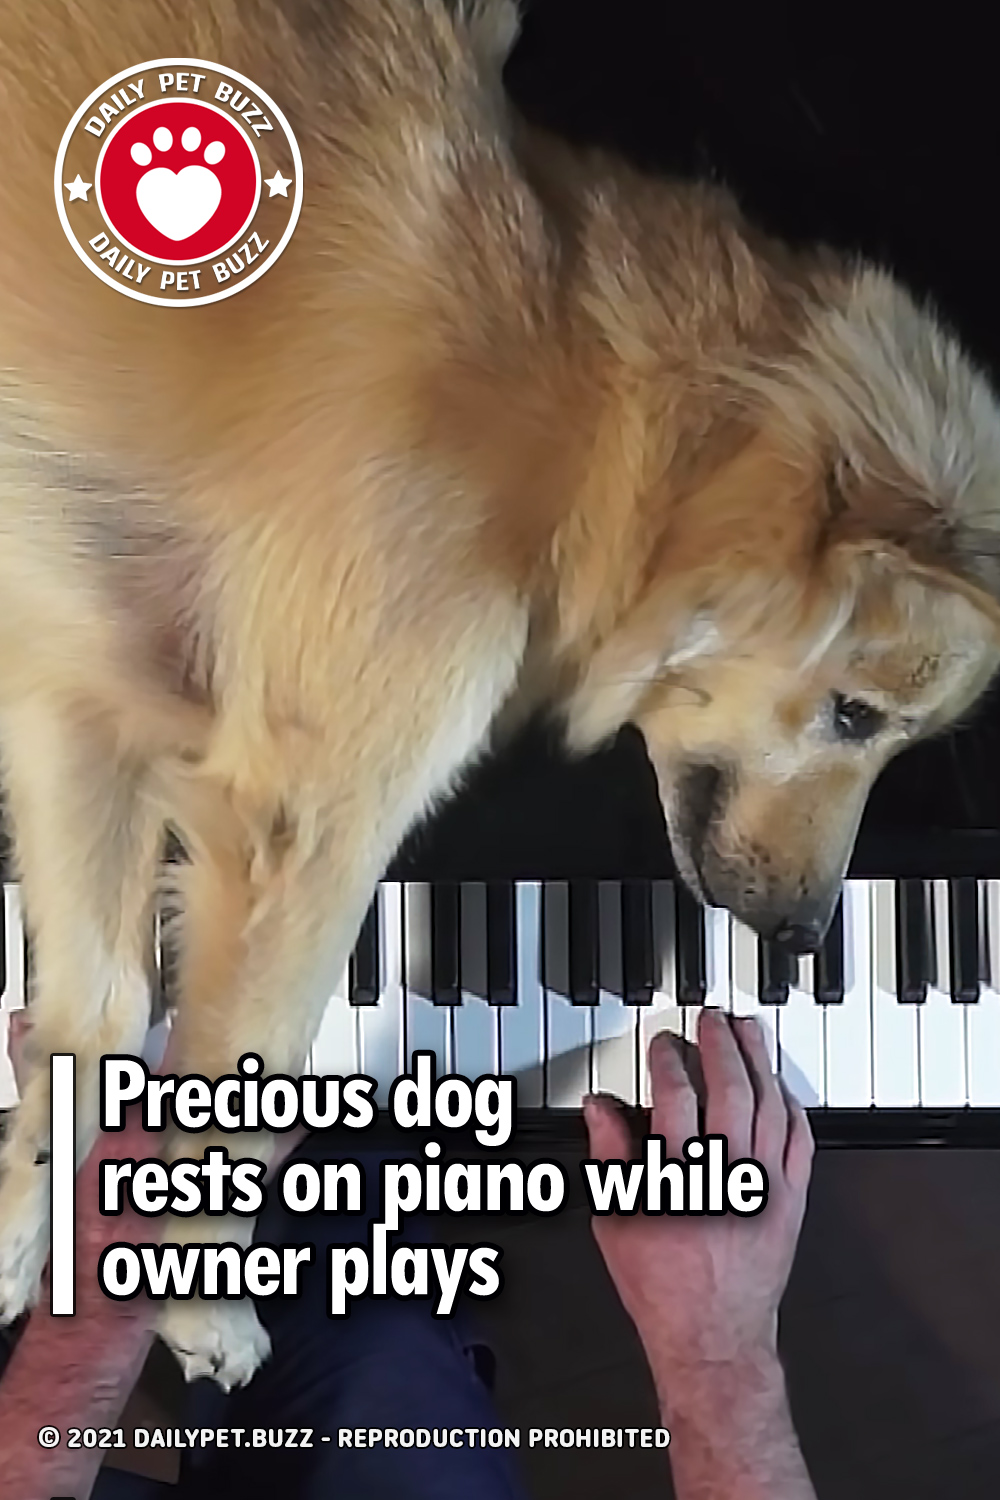 Precious dog rests on piano while owner plays